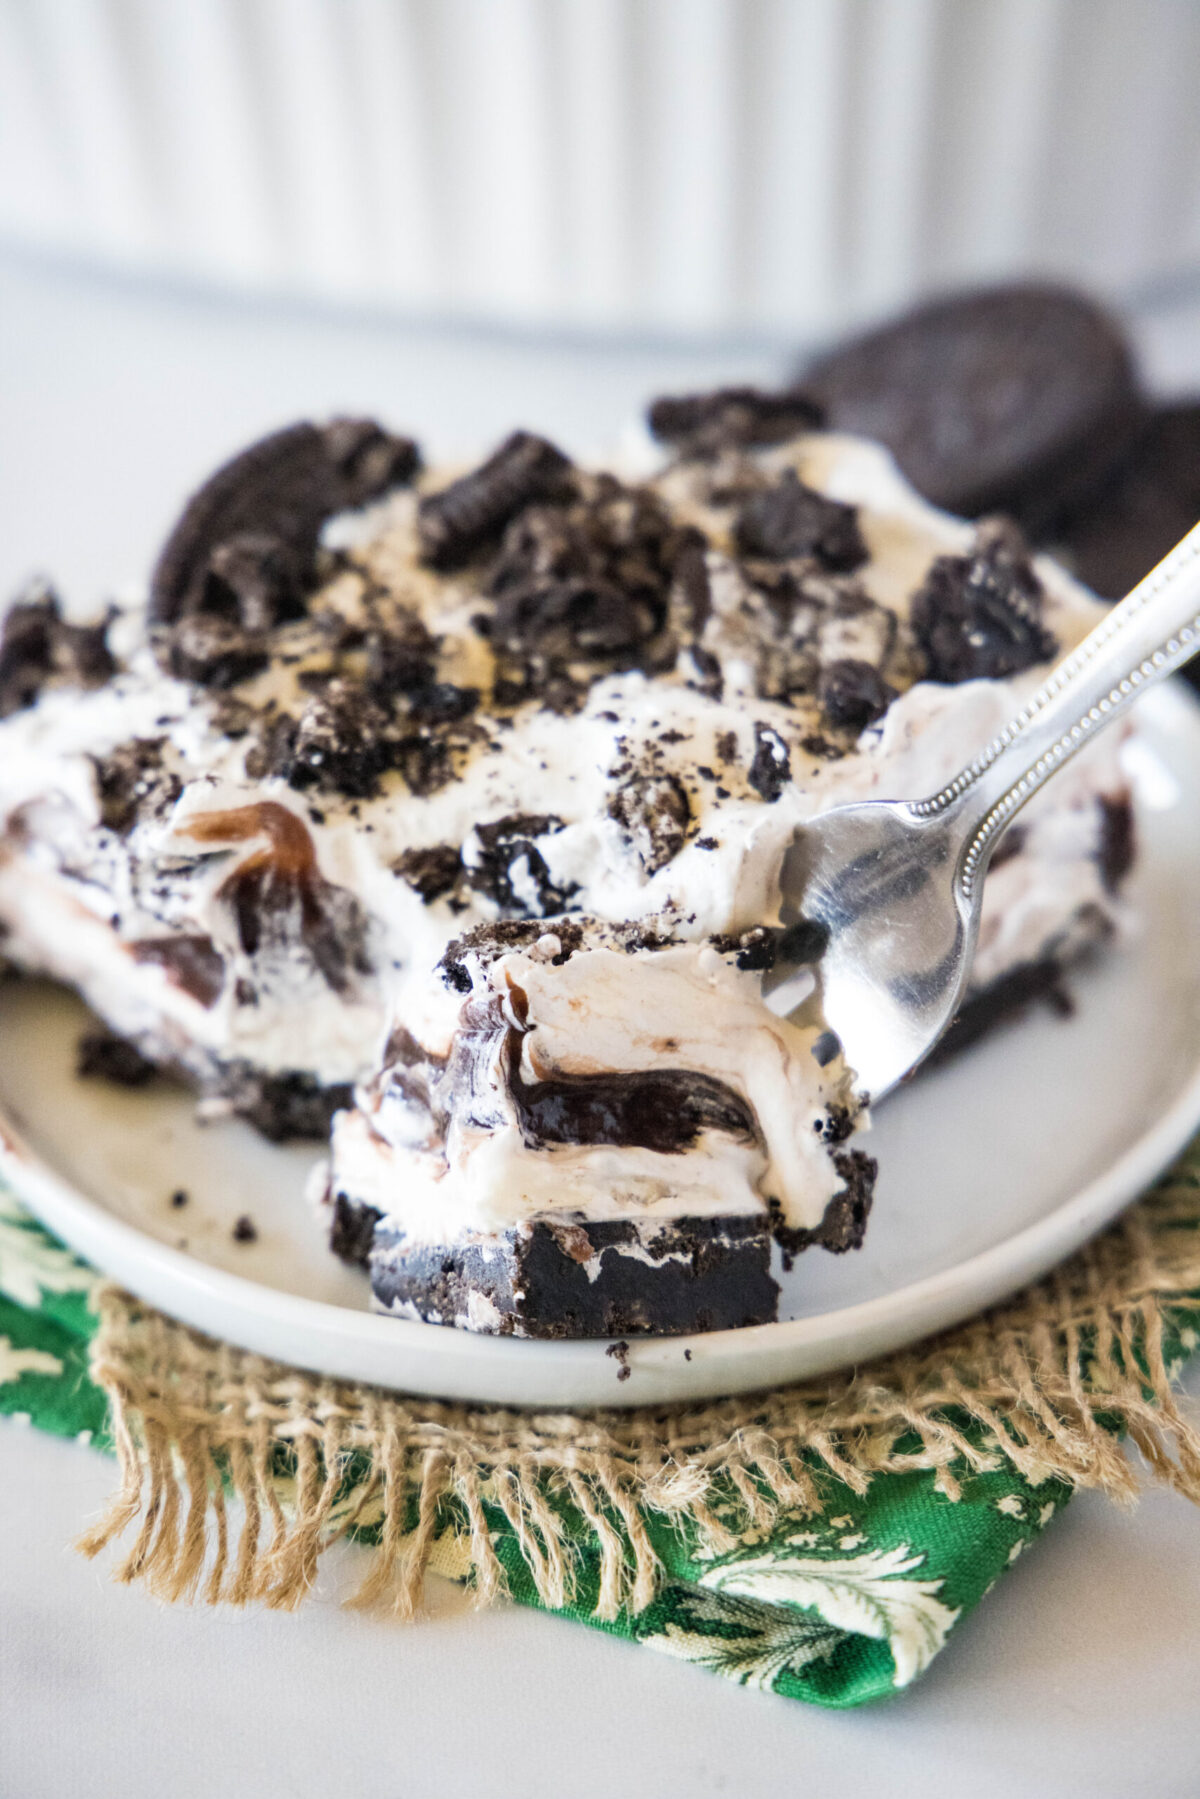 A bite of Oreo squares on a fork, with a plate filled with a slice of Oreo squares in the back